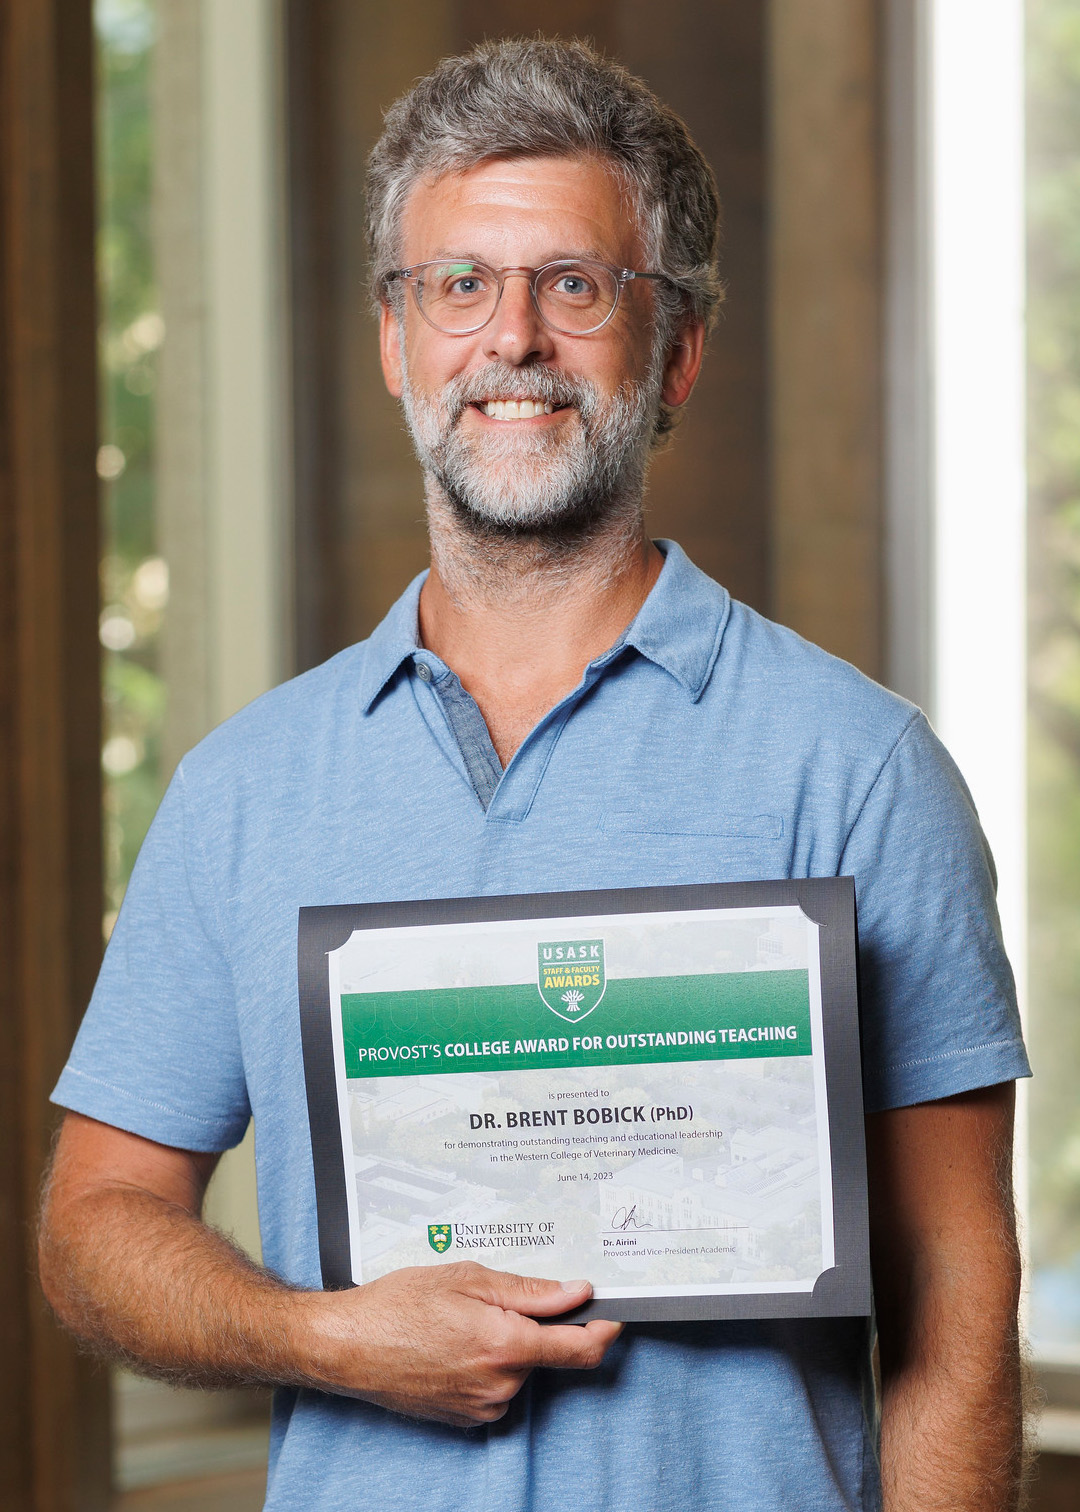 Dr. Bobick received his award at the USask Staff and Faculty Awards ceremony on June 14. Photo: Dave Stobbe.